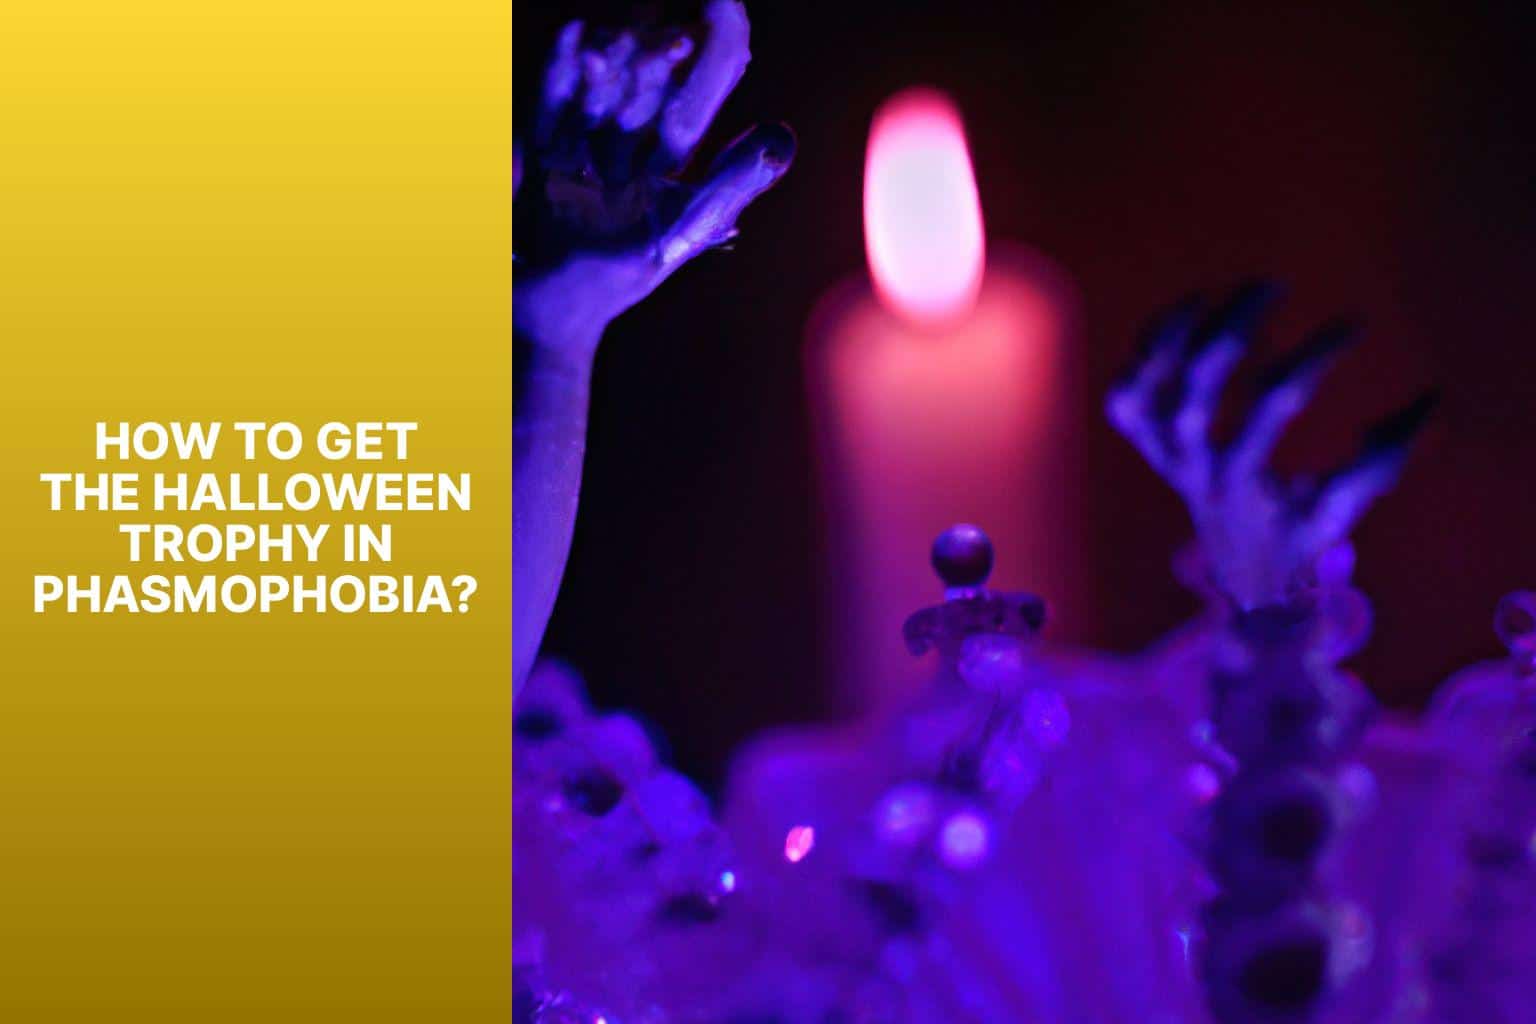 How to Get the Halloween Trophy in Phasmophobia? - how to get halloween trophy phasmophobia 